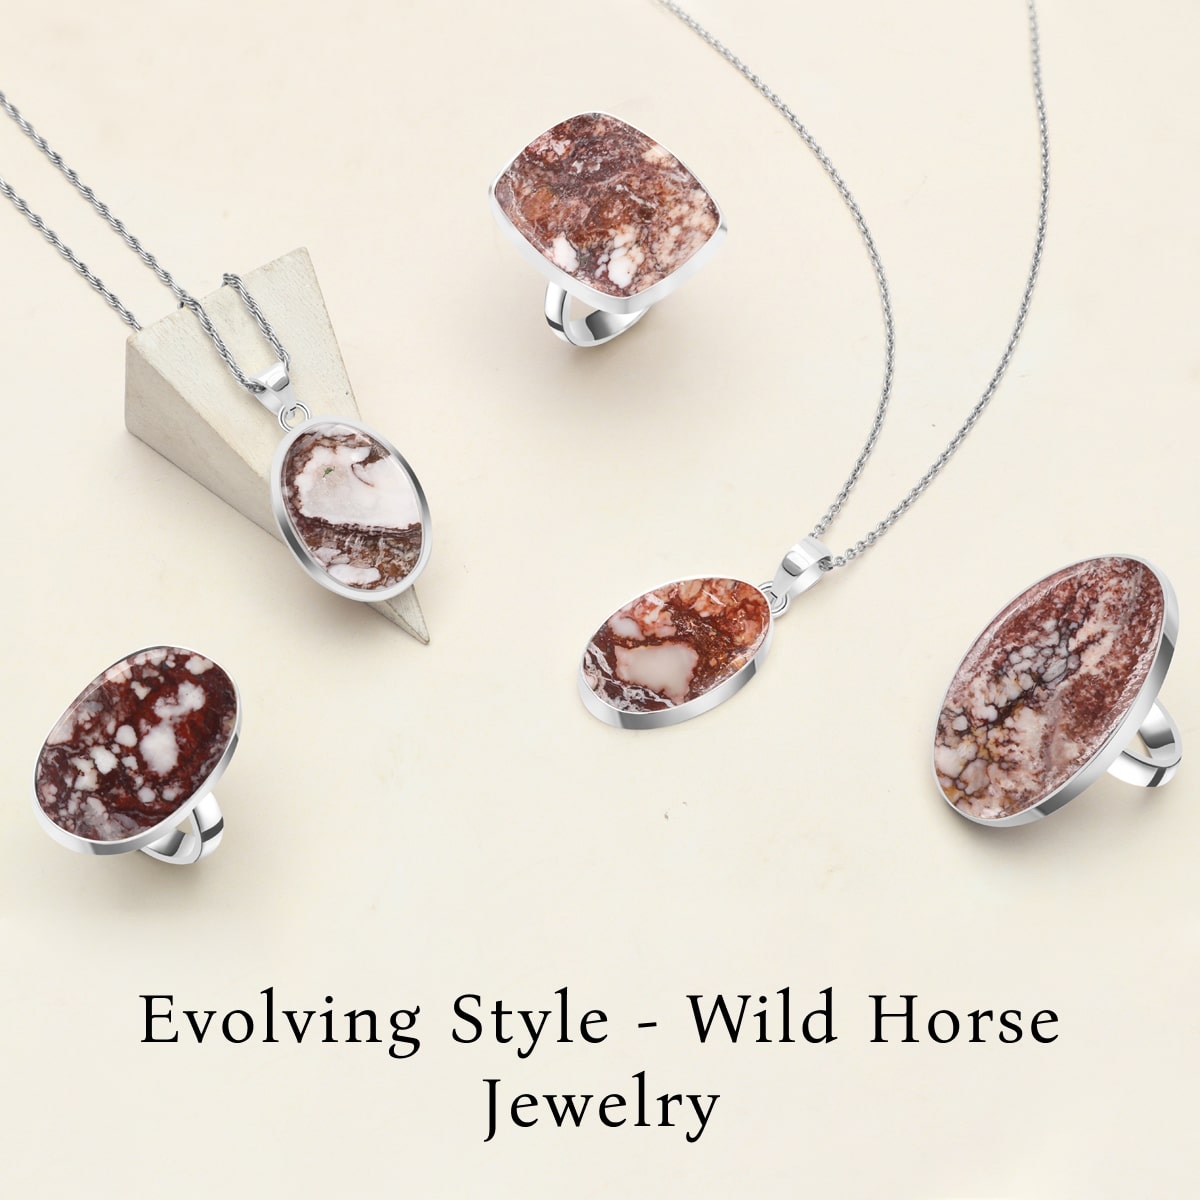 The Evolution of Silver Wild Horse Jewelry